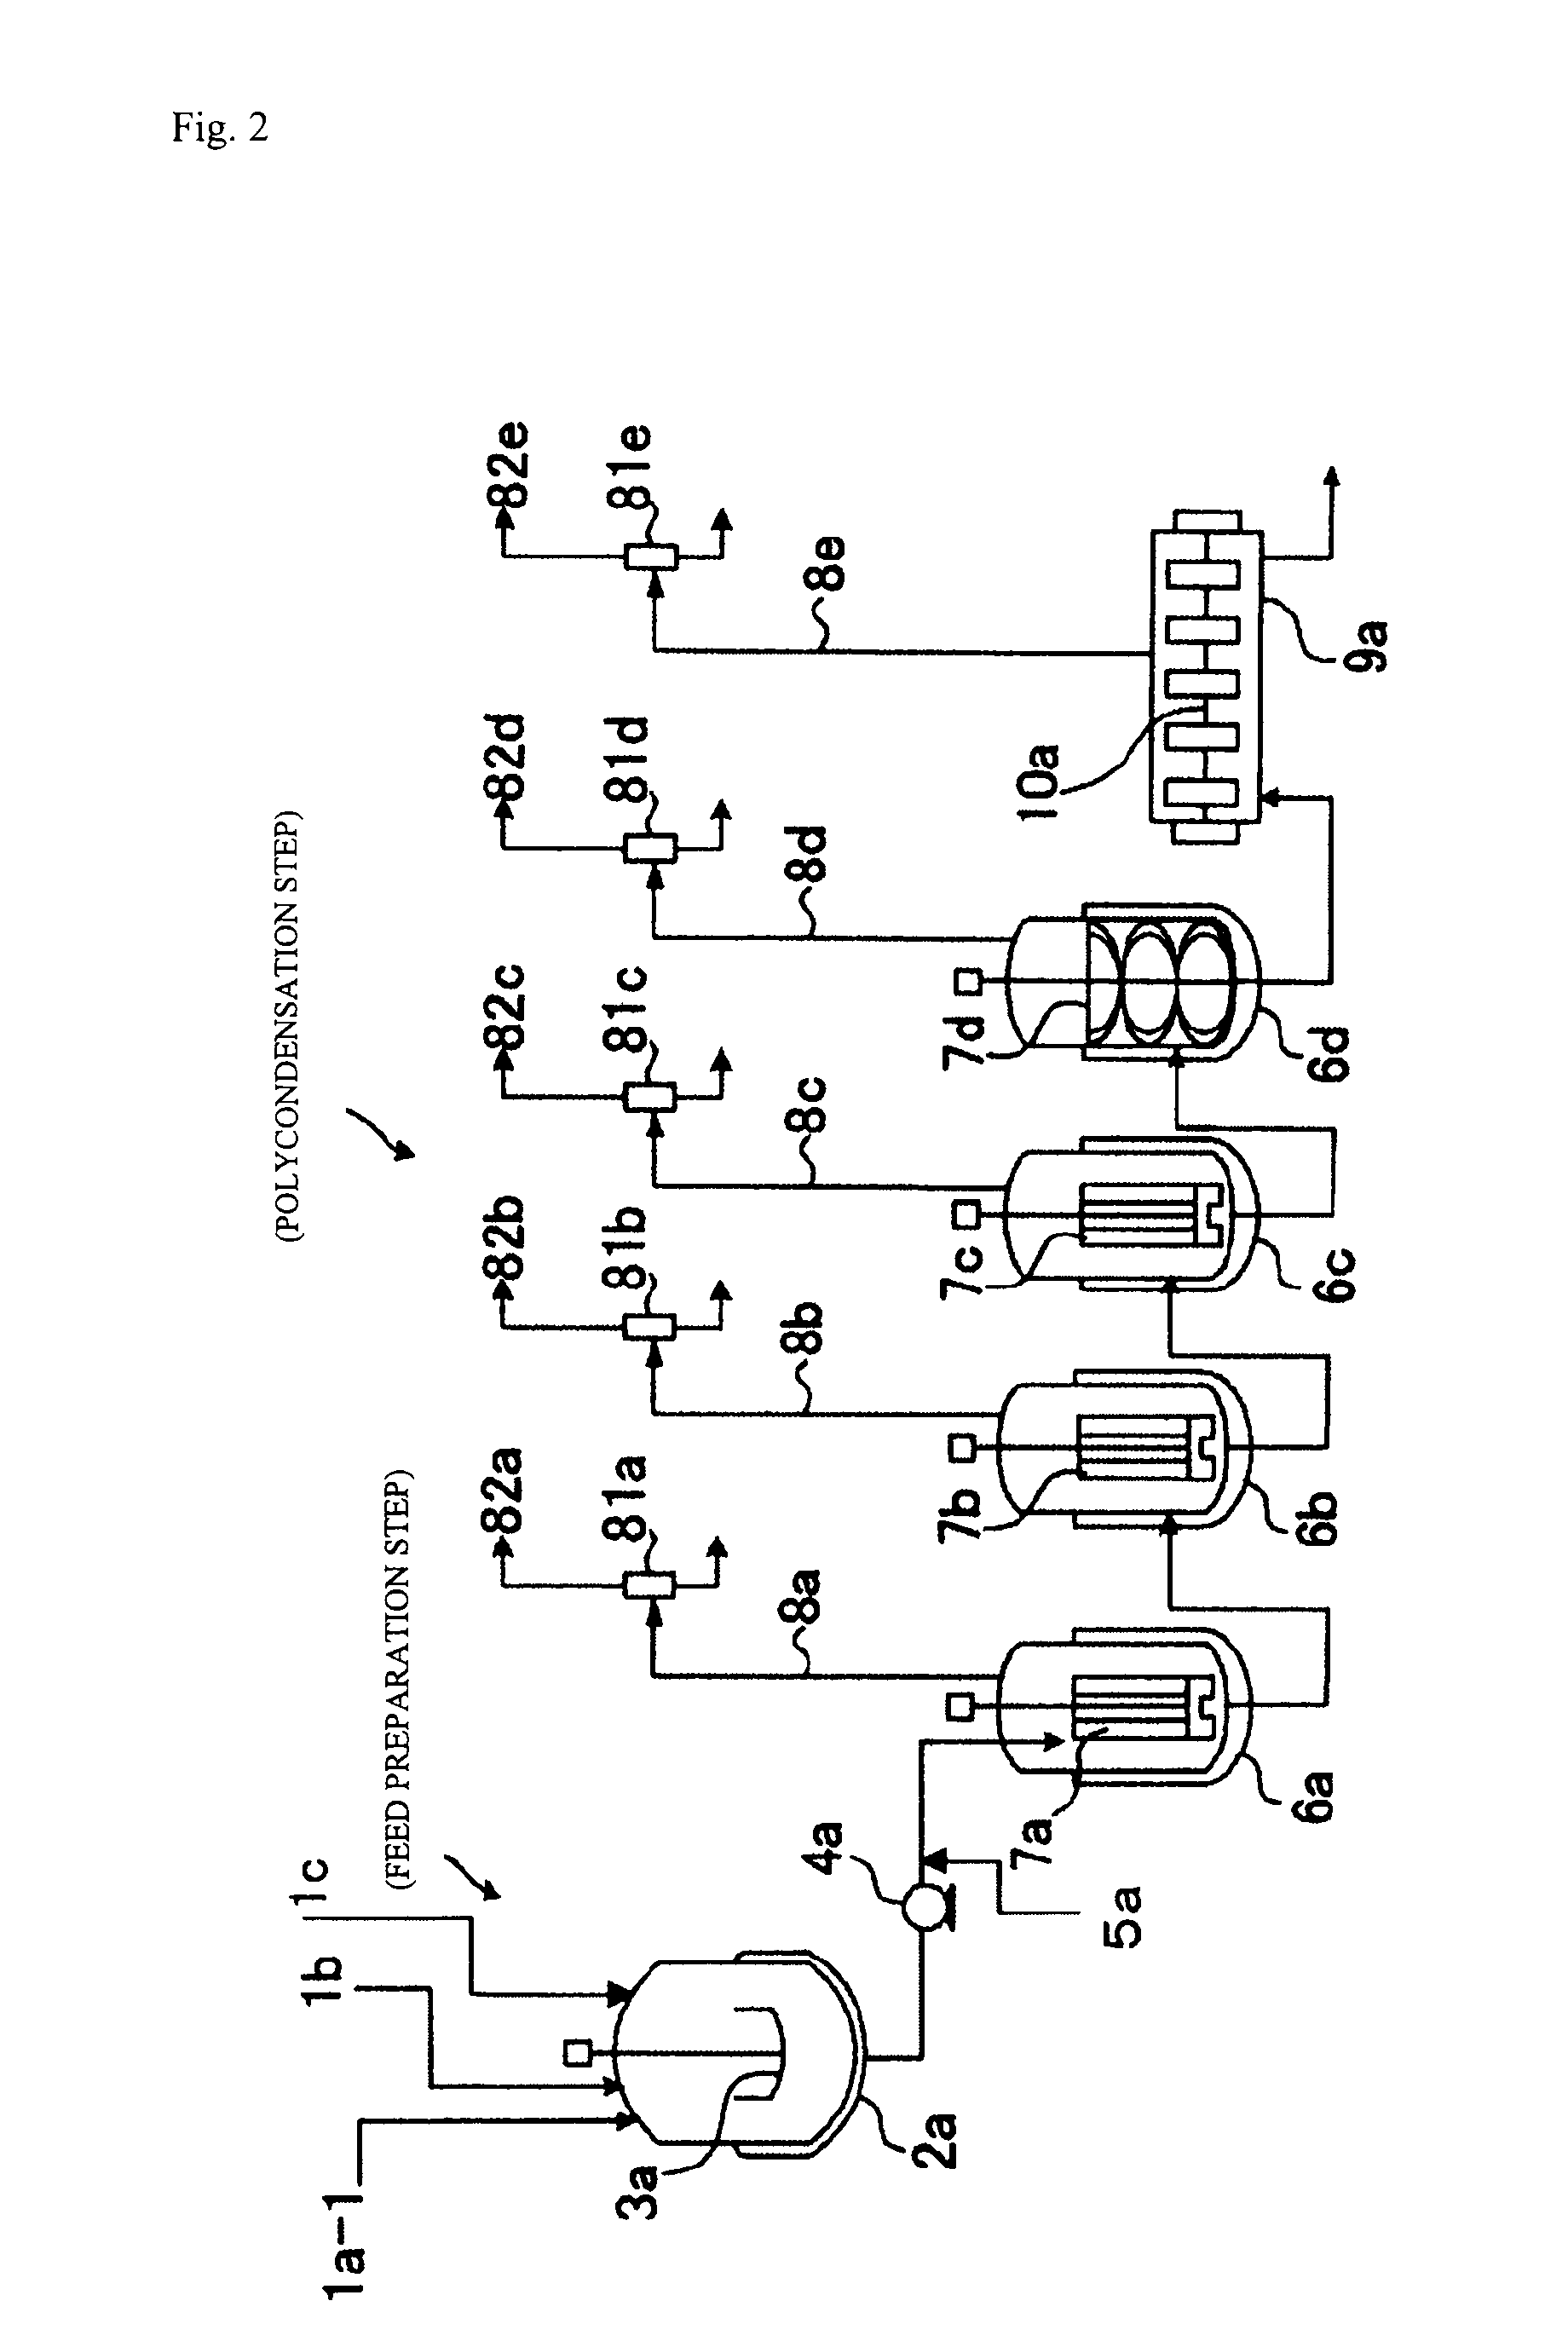 Processes for producing polycarbonate